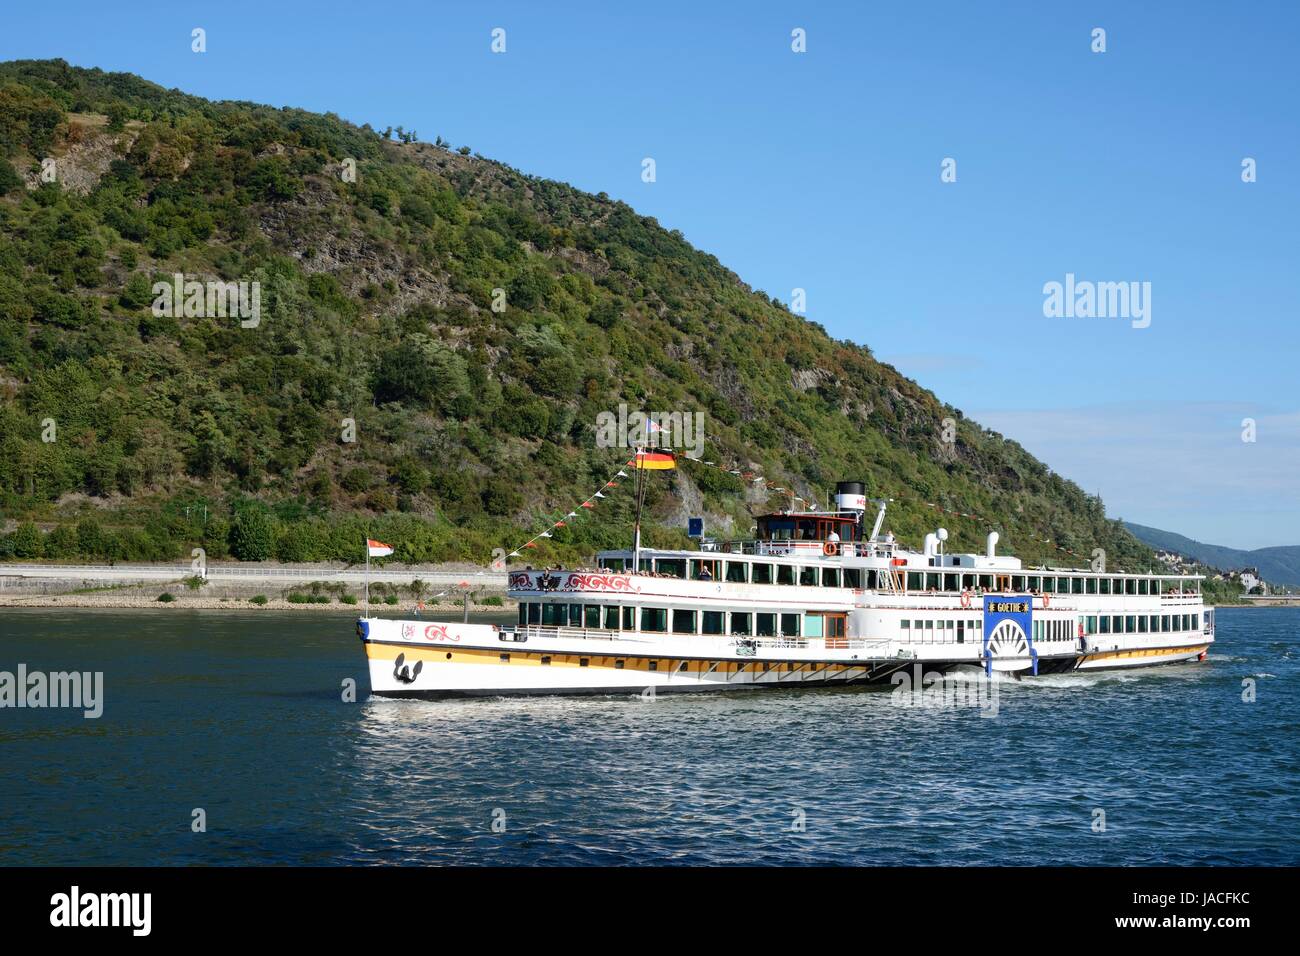 BACHARACH, GERMANY - SEPTEMBER 2: Tourists making a ship round trip on the river Rhine in Bacharach, Germany on September 2, 2013. The ship Goethe of the KD river cruise company is over 100 years old. Foto taken from the port with view accross the Rhine. Stock Photo